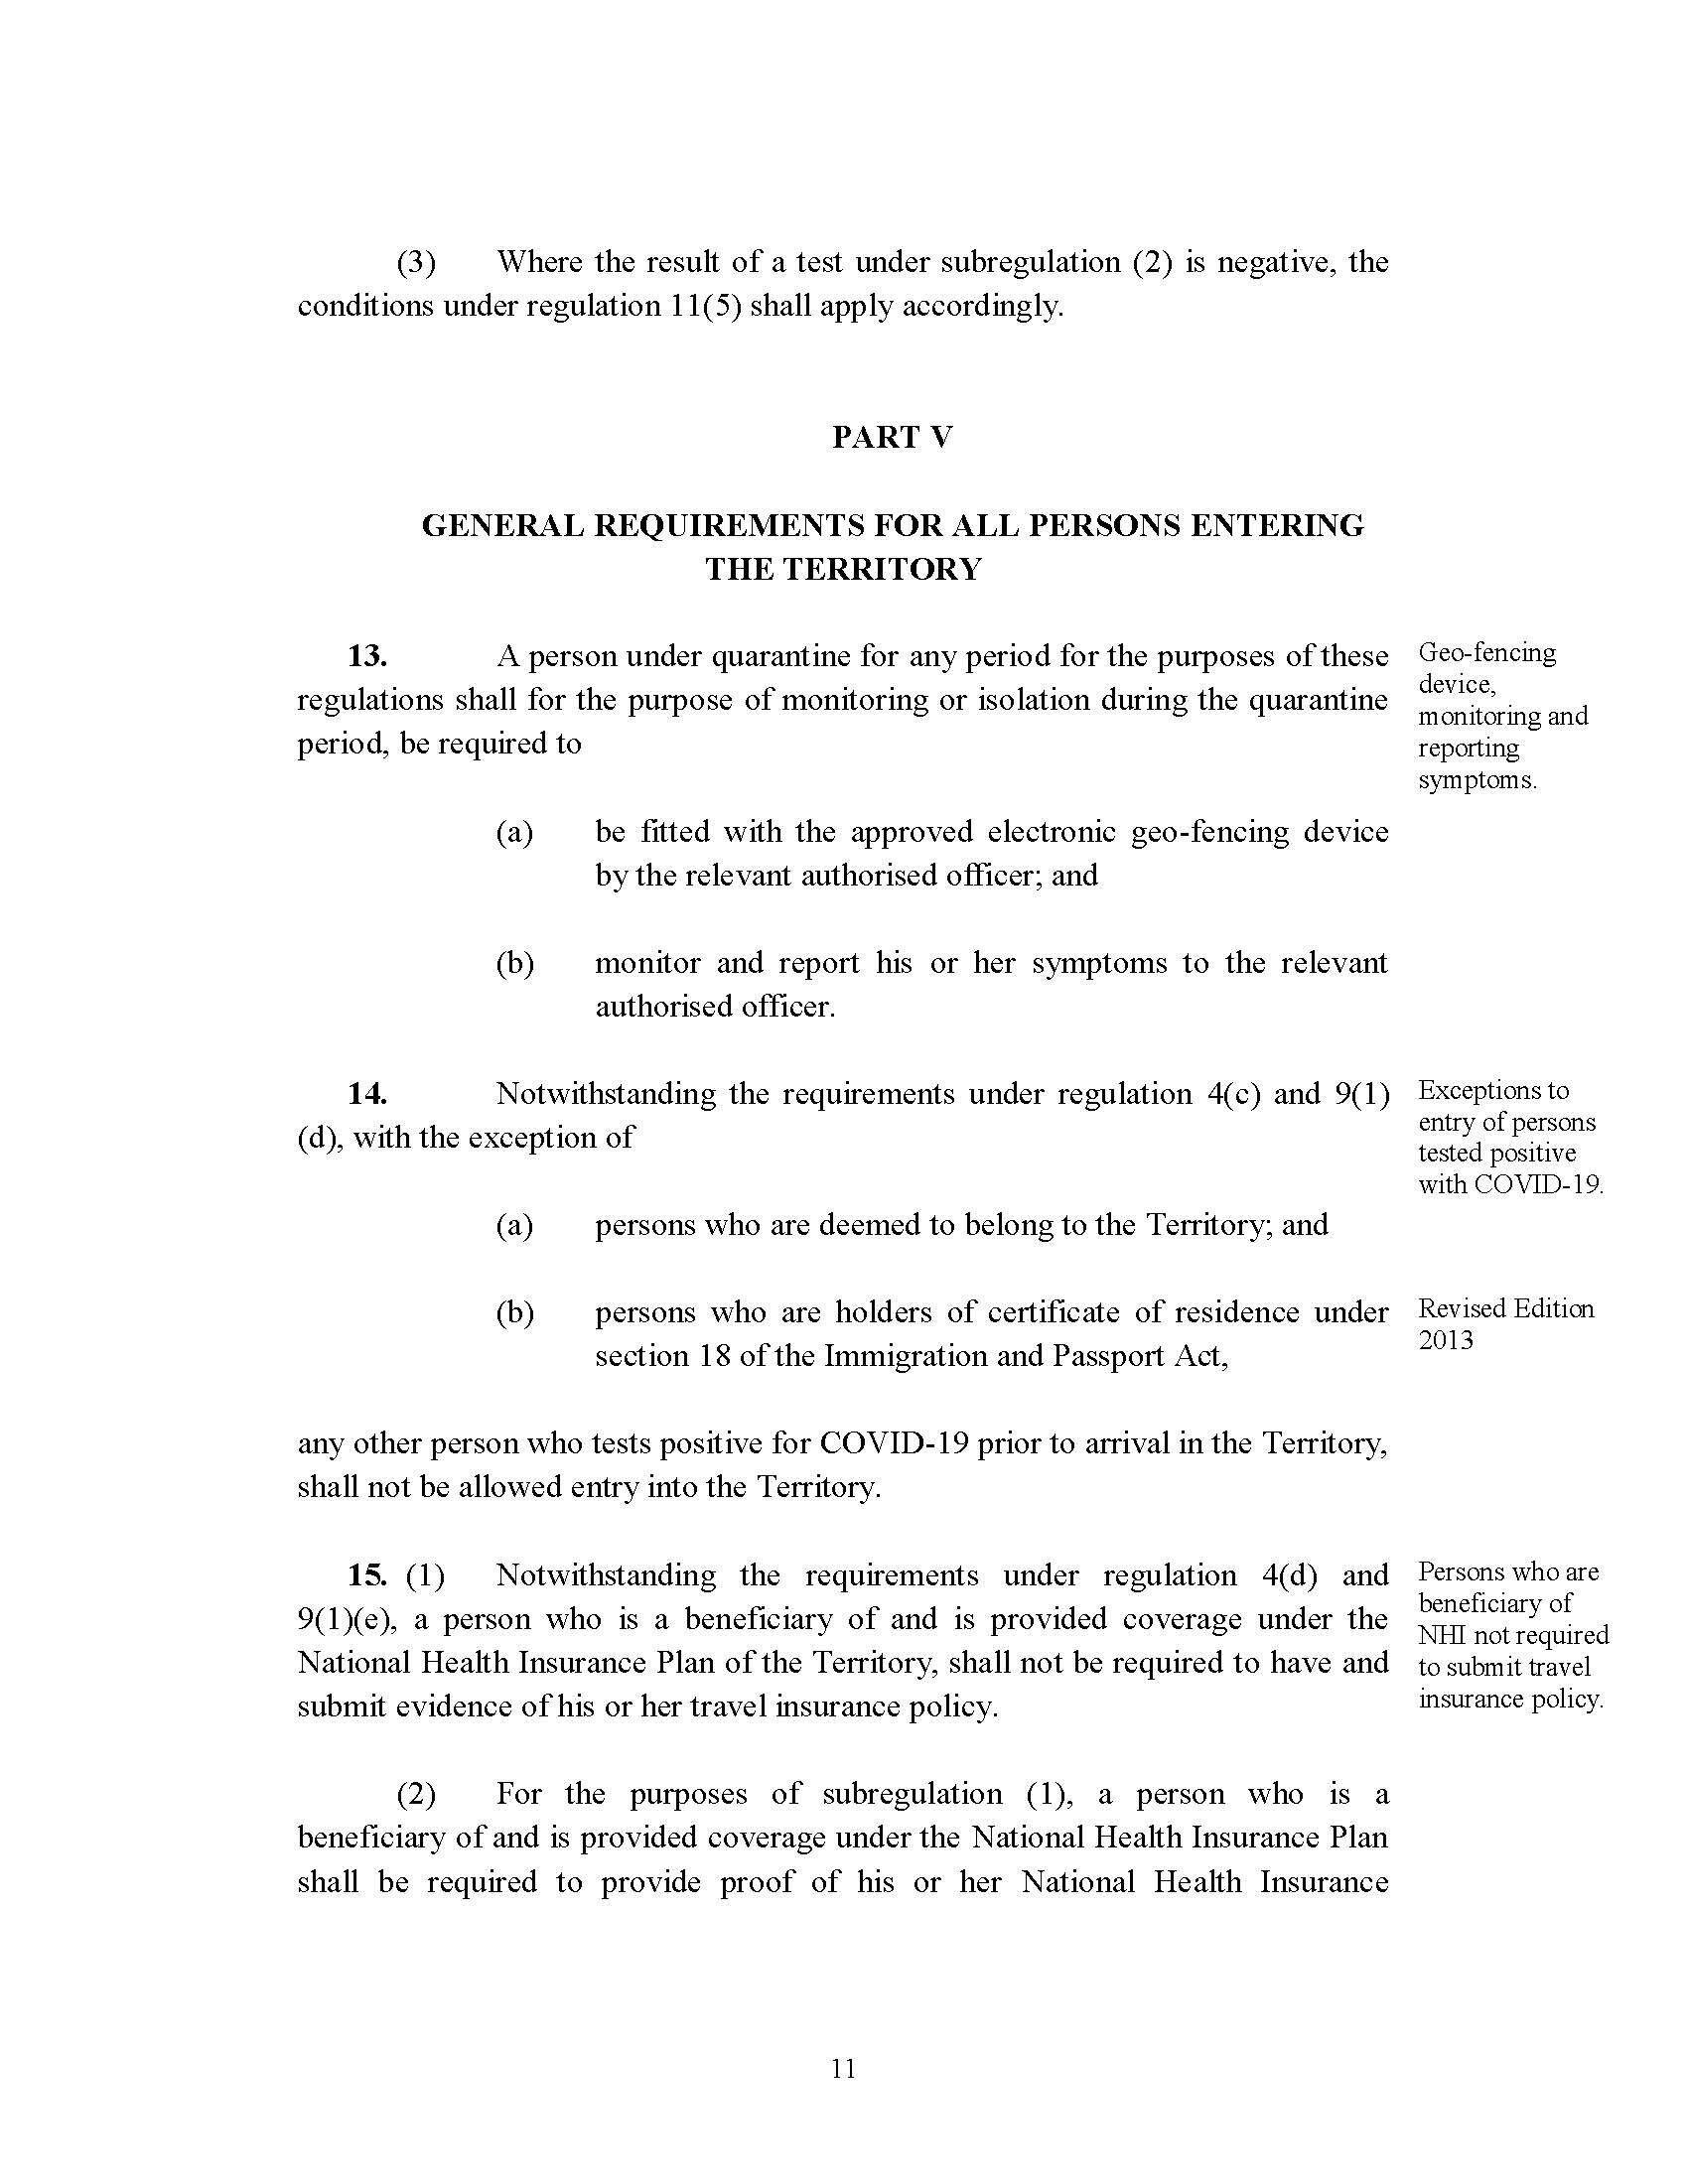 Attached picture SI No 55 of 2021 -- COVID-19 Control and Suppression (Entry of Persons) (No. 3) Regulations, 2021_Page_11.jpg